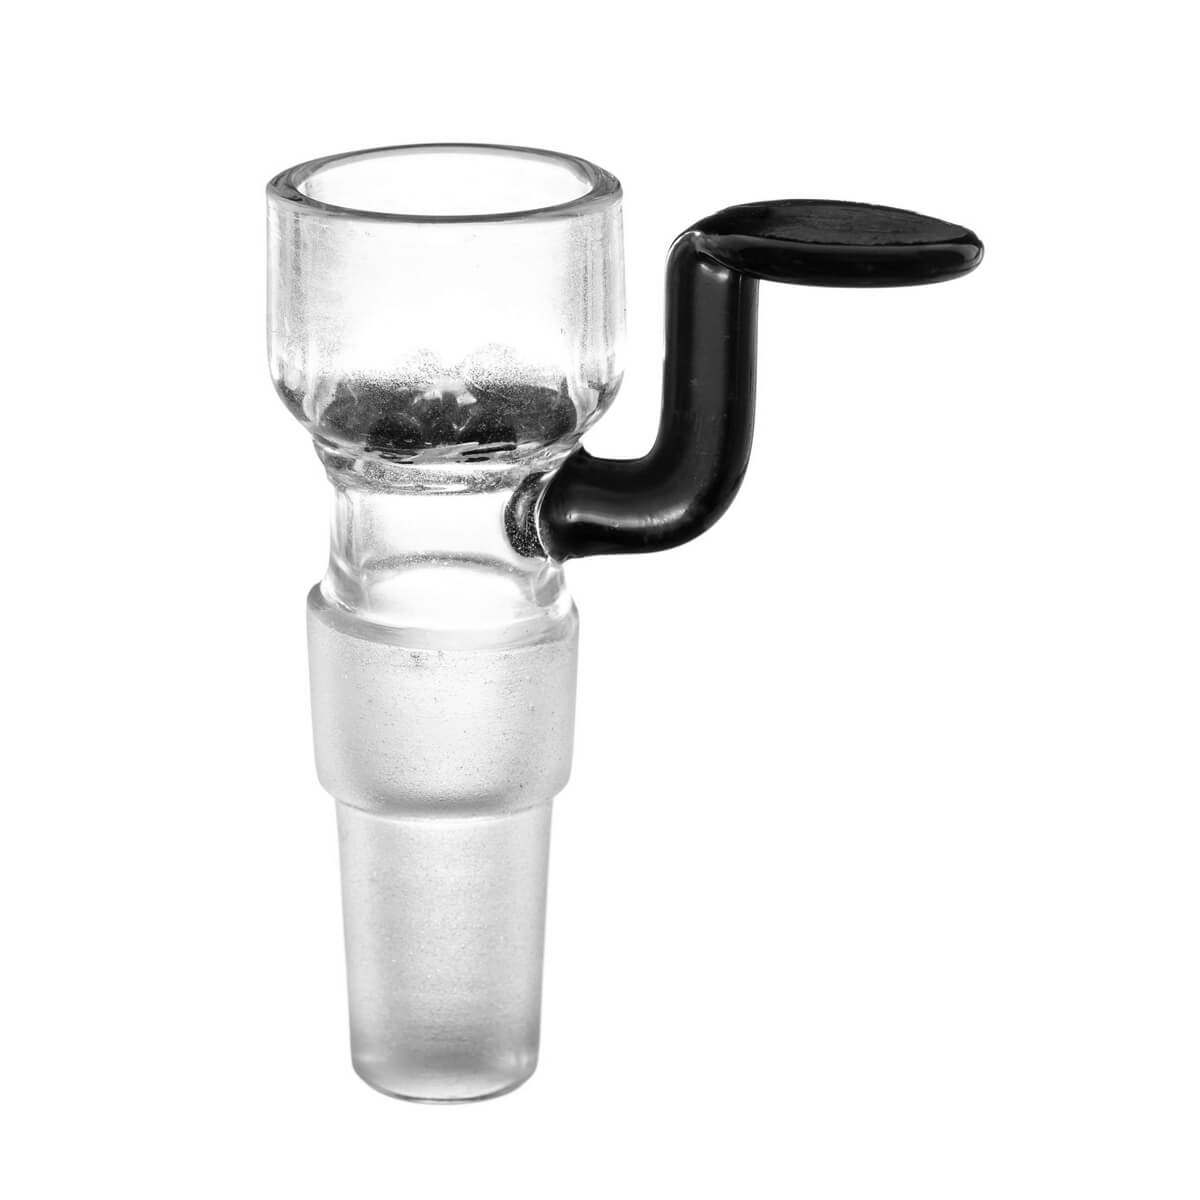 Black Bong Glass Bowl Holder with Screen Dual Size